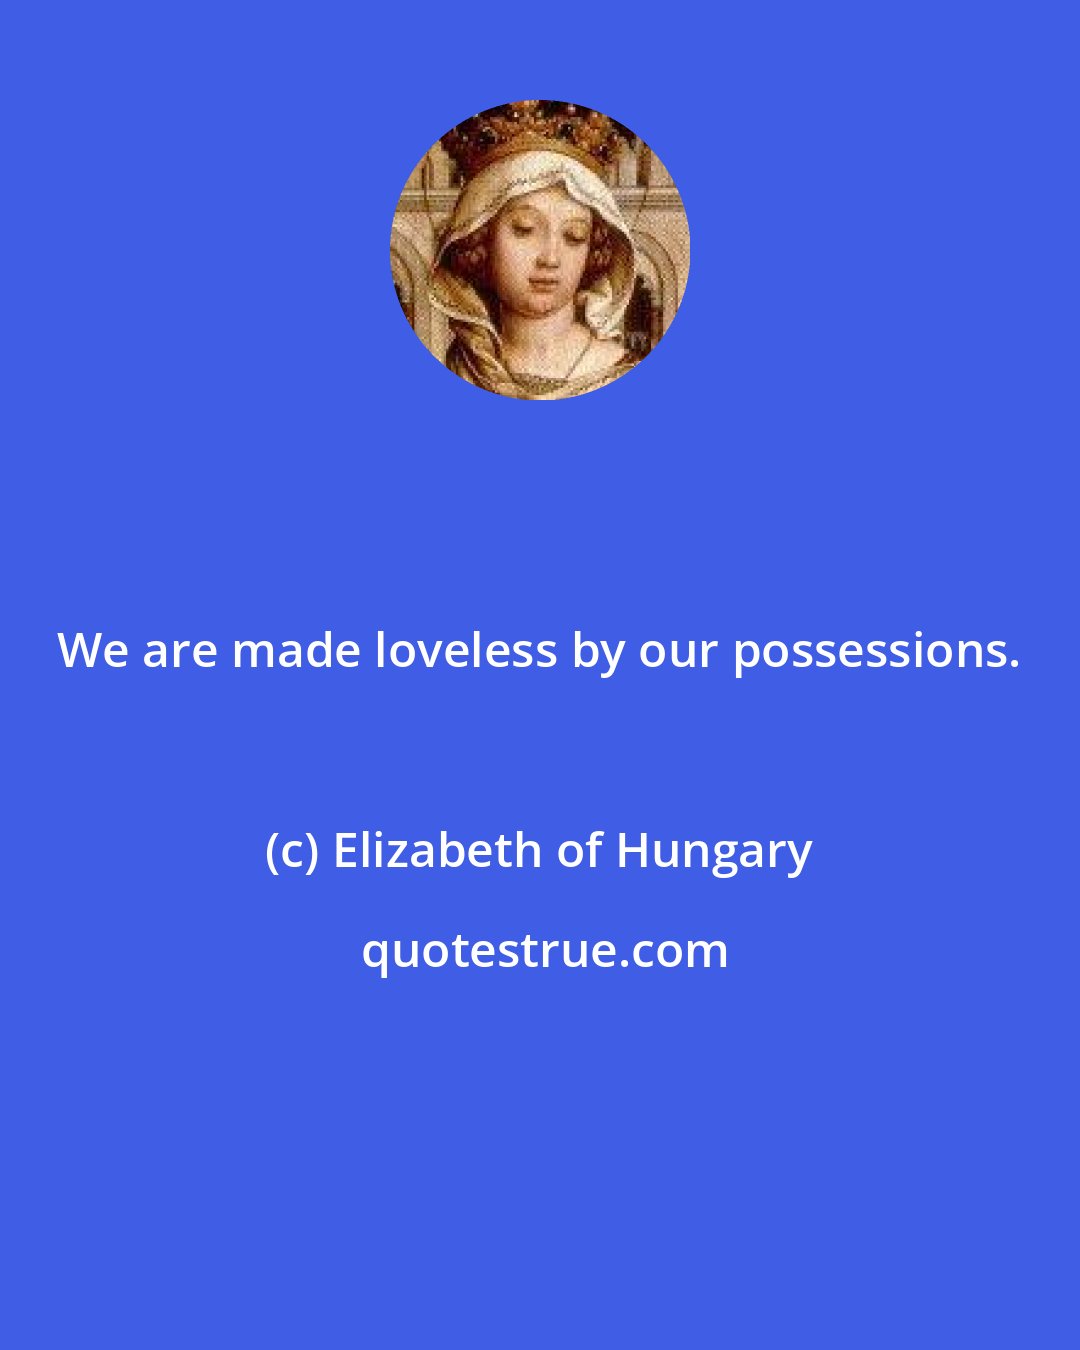 Elizabeth of Hungary: We are made loveless by our possessions.